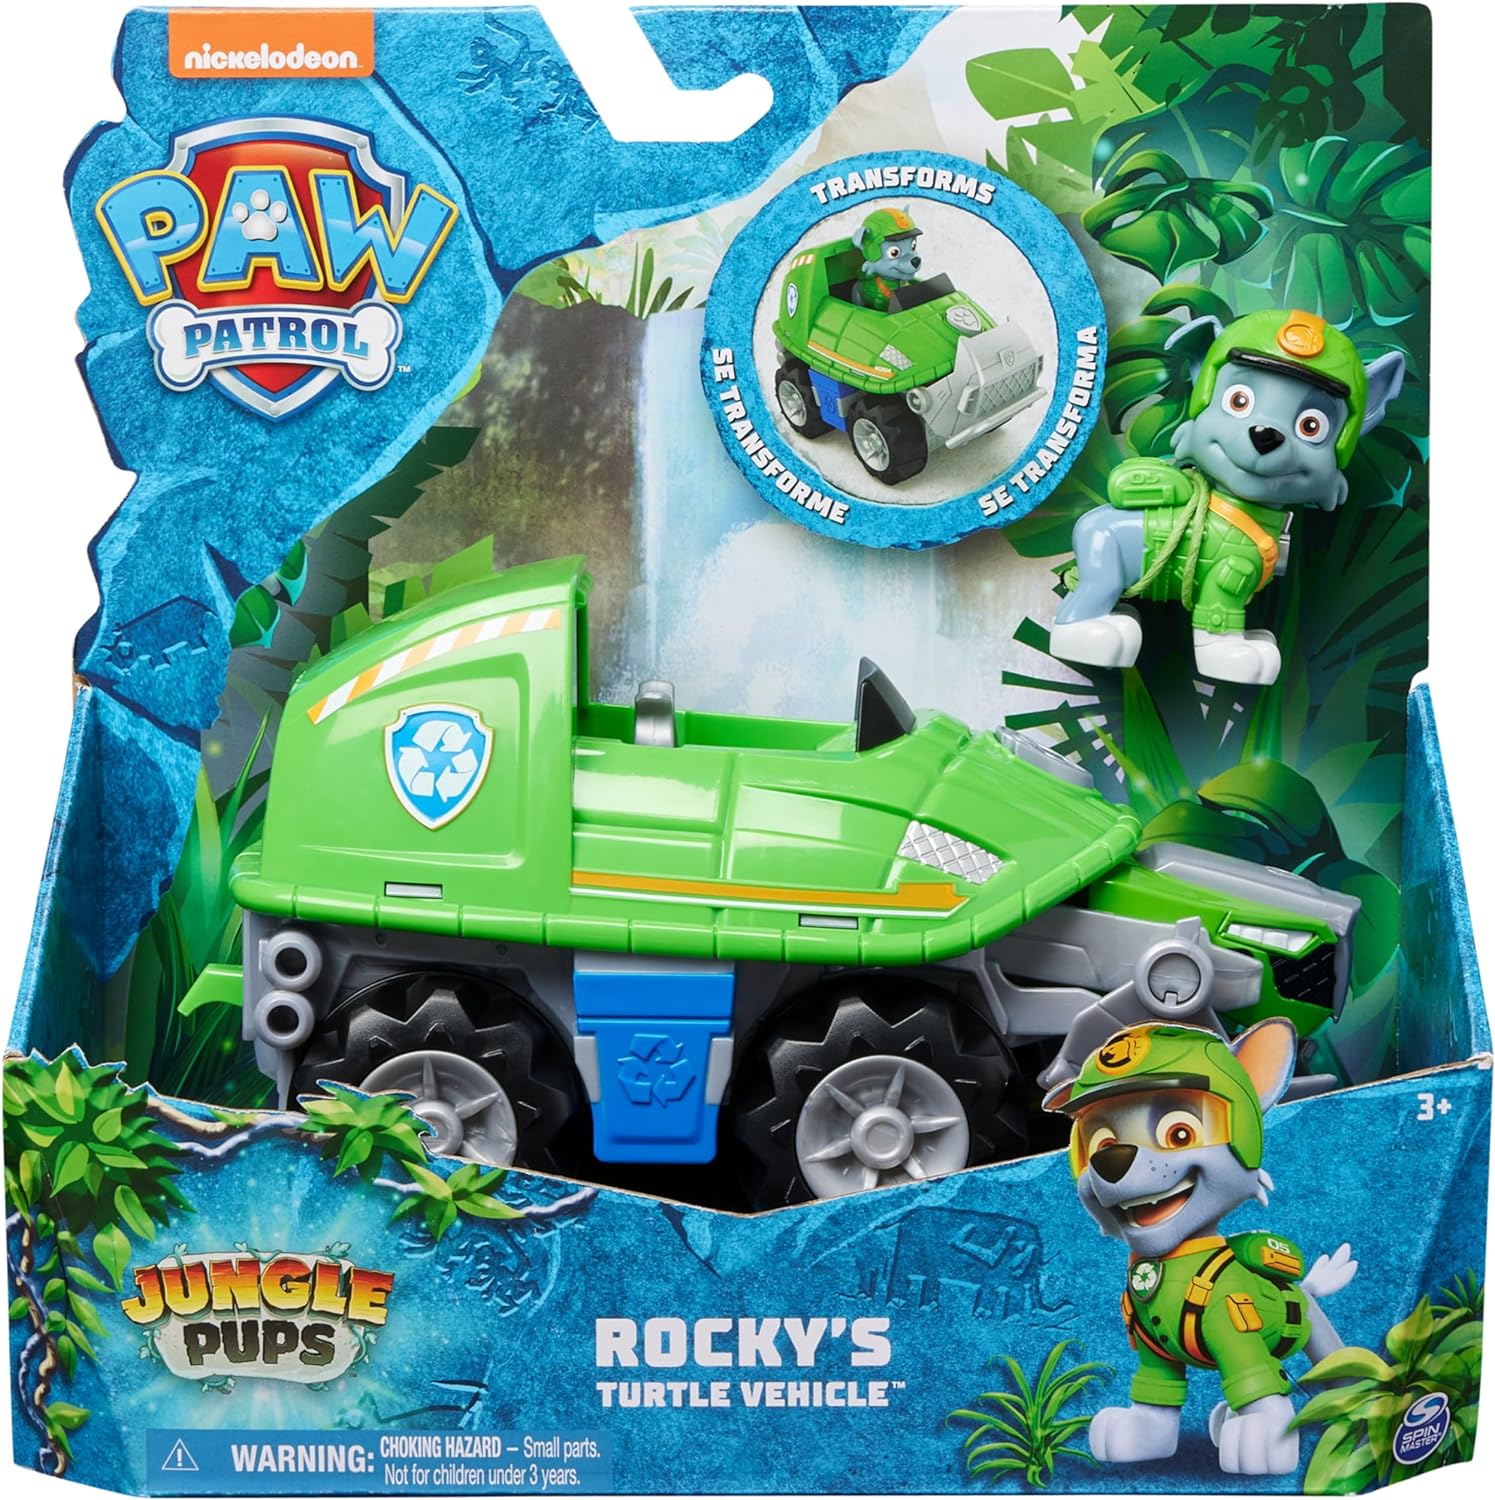 Paw Patrol Jungle Pups ROCKY Snapping Turtle Vehicle